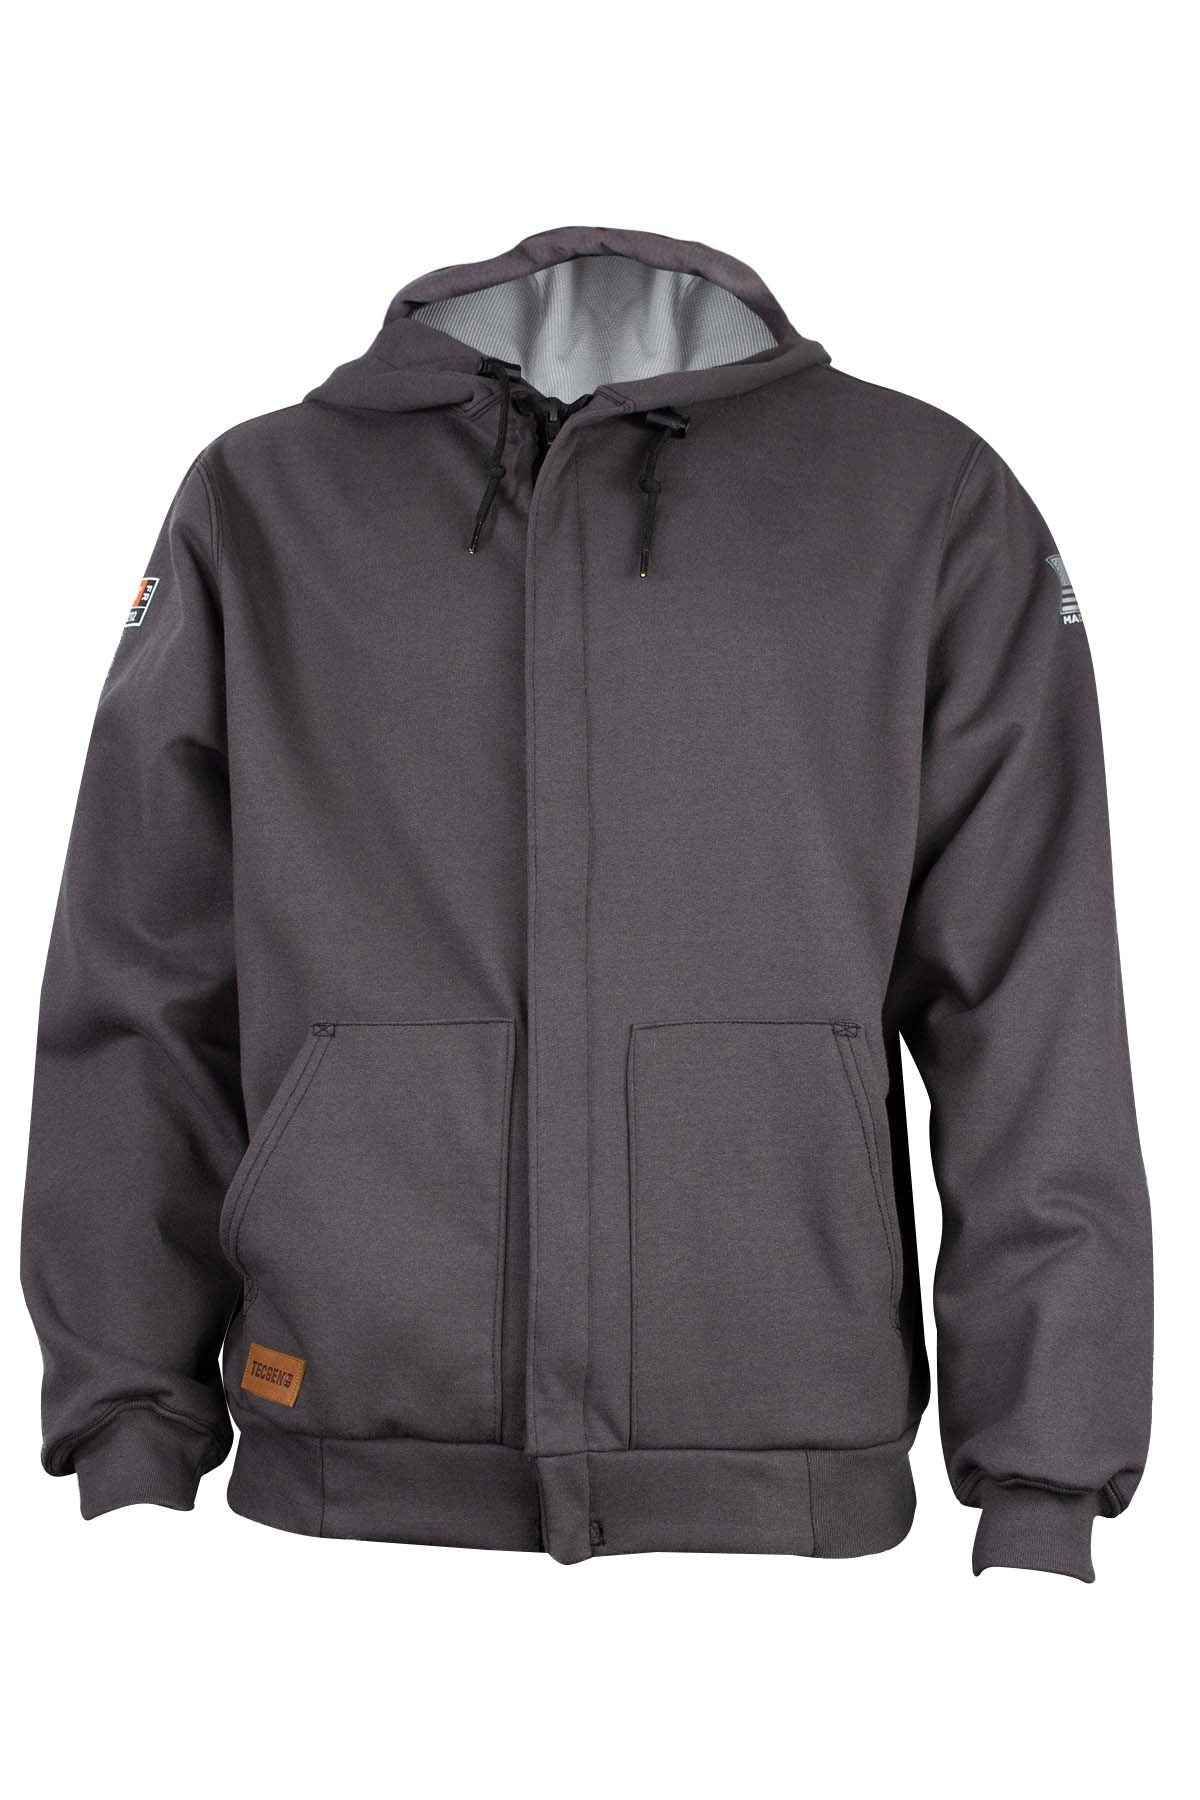 National Safety Apparel Tecgen Lined FR Zip Front Hoodie, 39 cal/cm² (each)